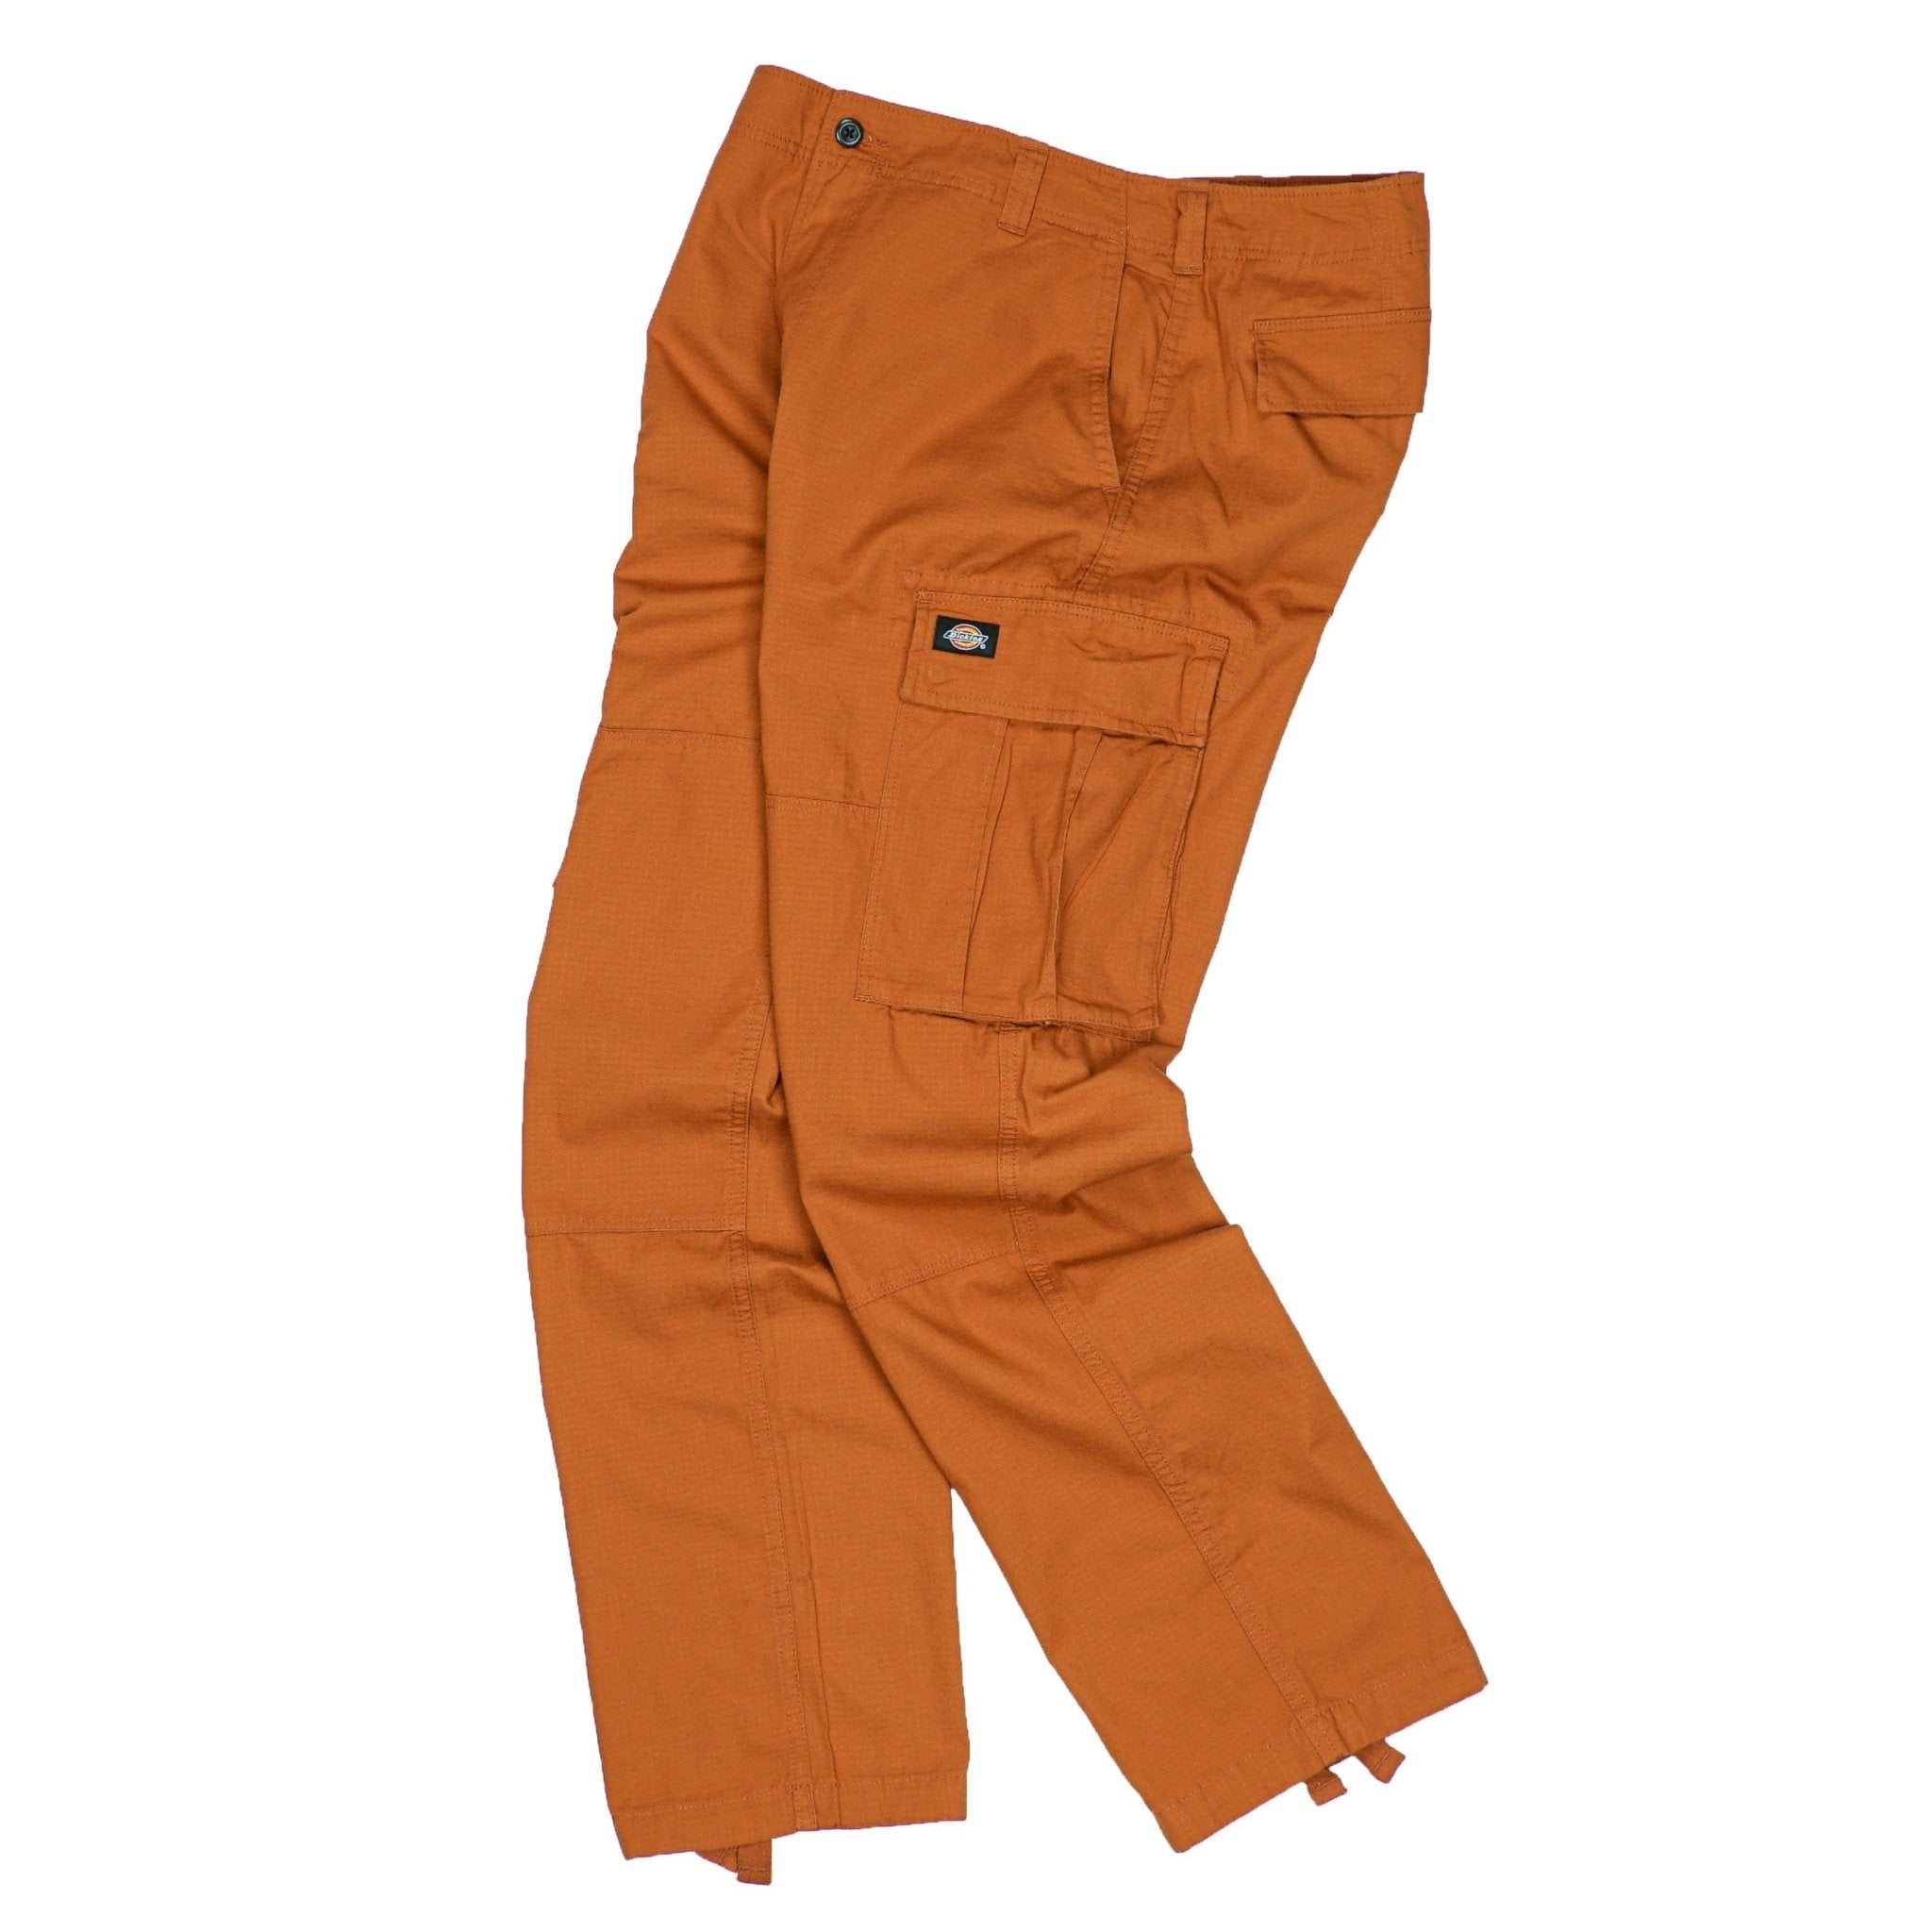 Ripstop Cargo Pants in marmalade